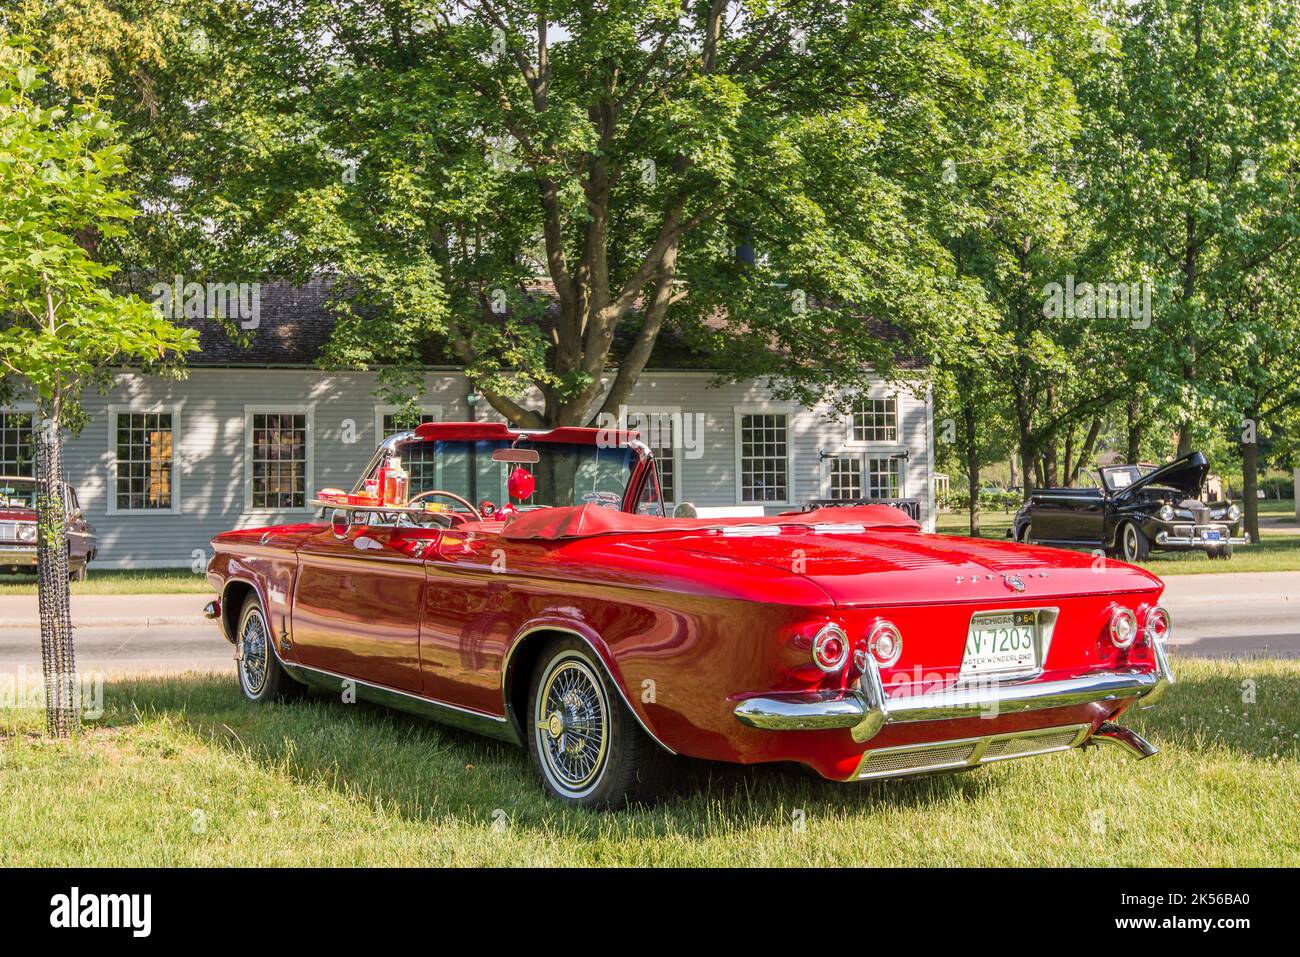 DEARBORN, MI/USA - JUNE 17, 2017: A 1964 Chevrolet Corvair Spyder car at The Henry Ford (THF) Motor Muster car show, Greenfield Village, near Detroit, Stock Photo